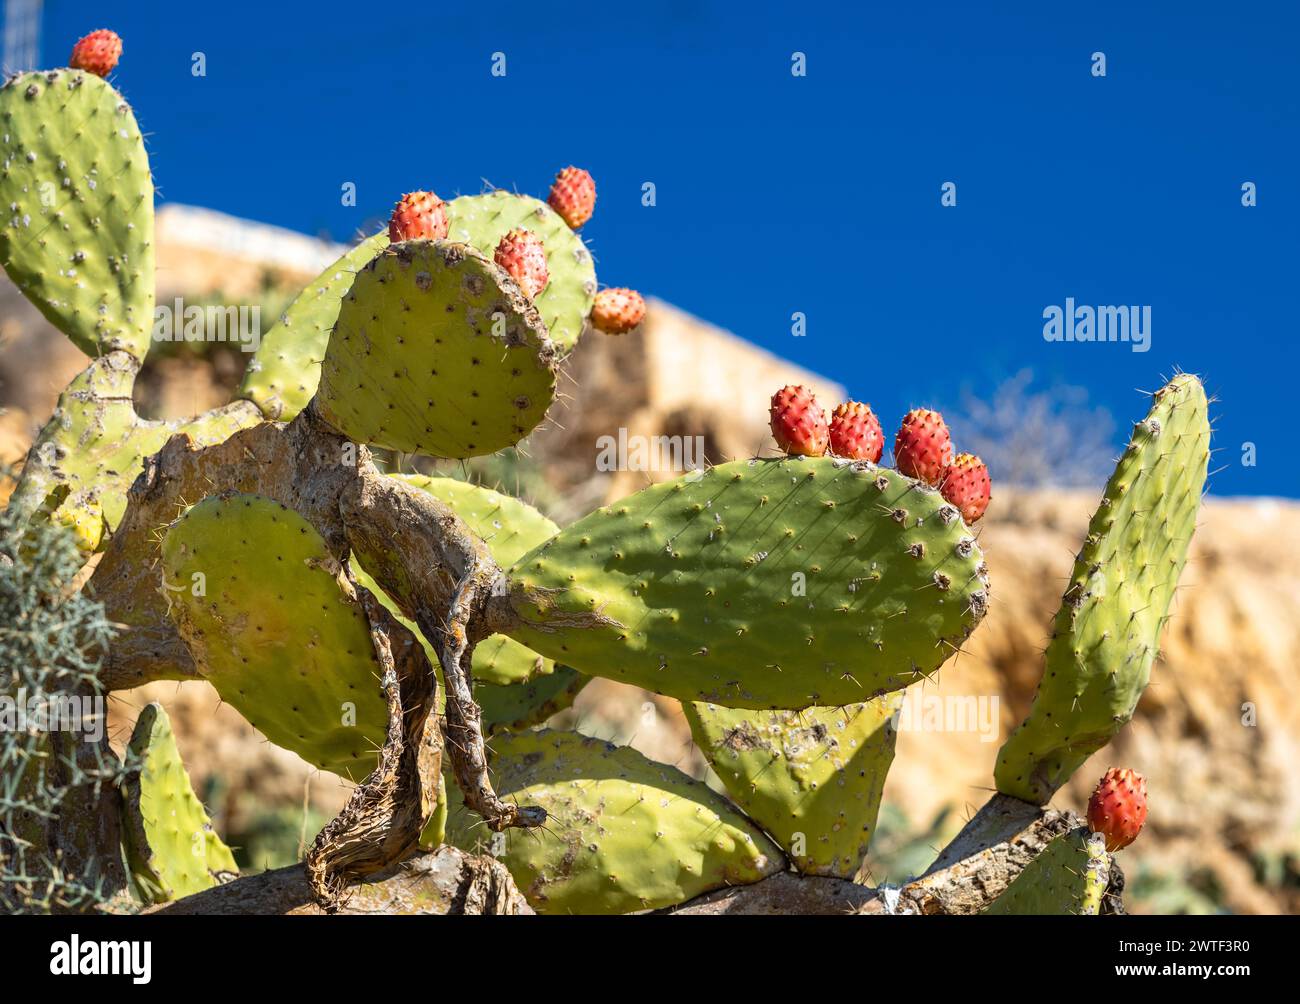 Prickly pear cactus (Opuntia ficus-indica), or Barbary fig, growing in Takrouna, Tunisia. Stock Photo